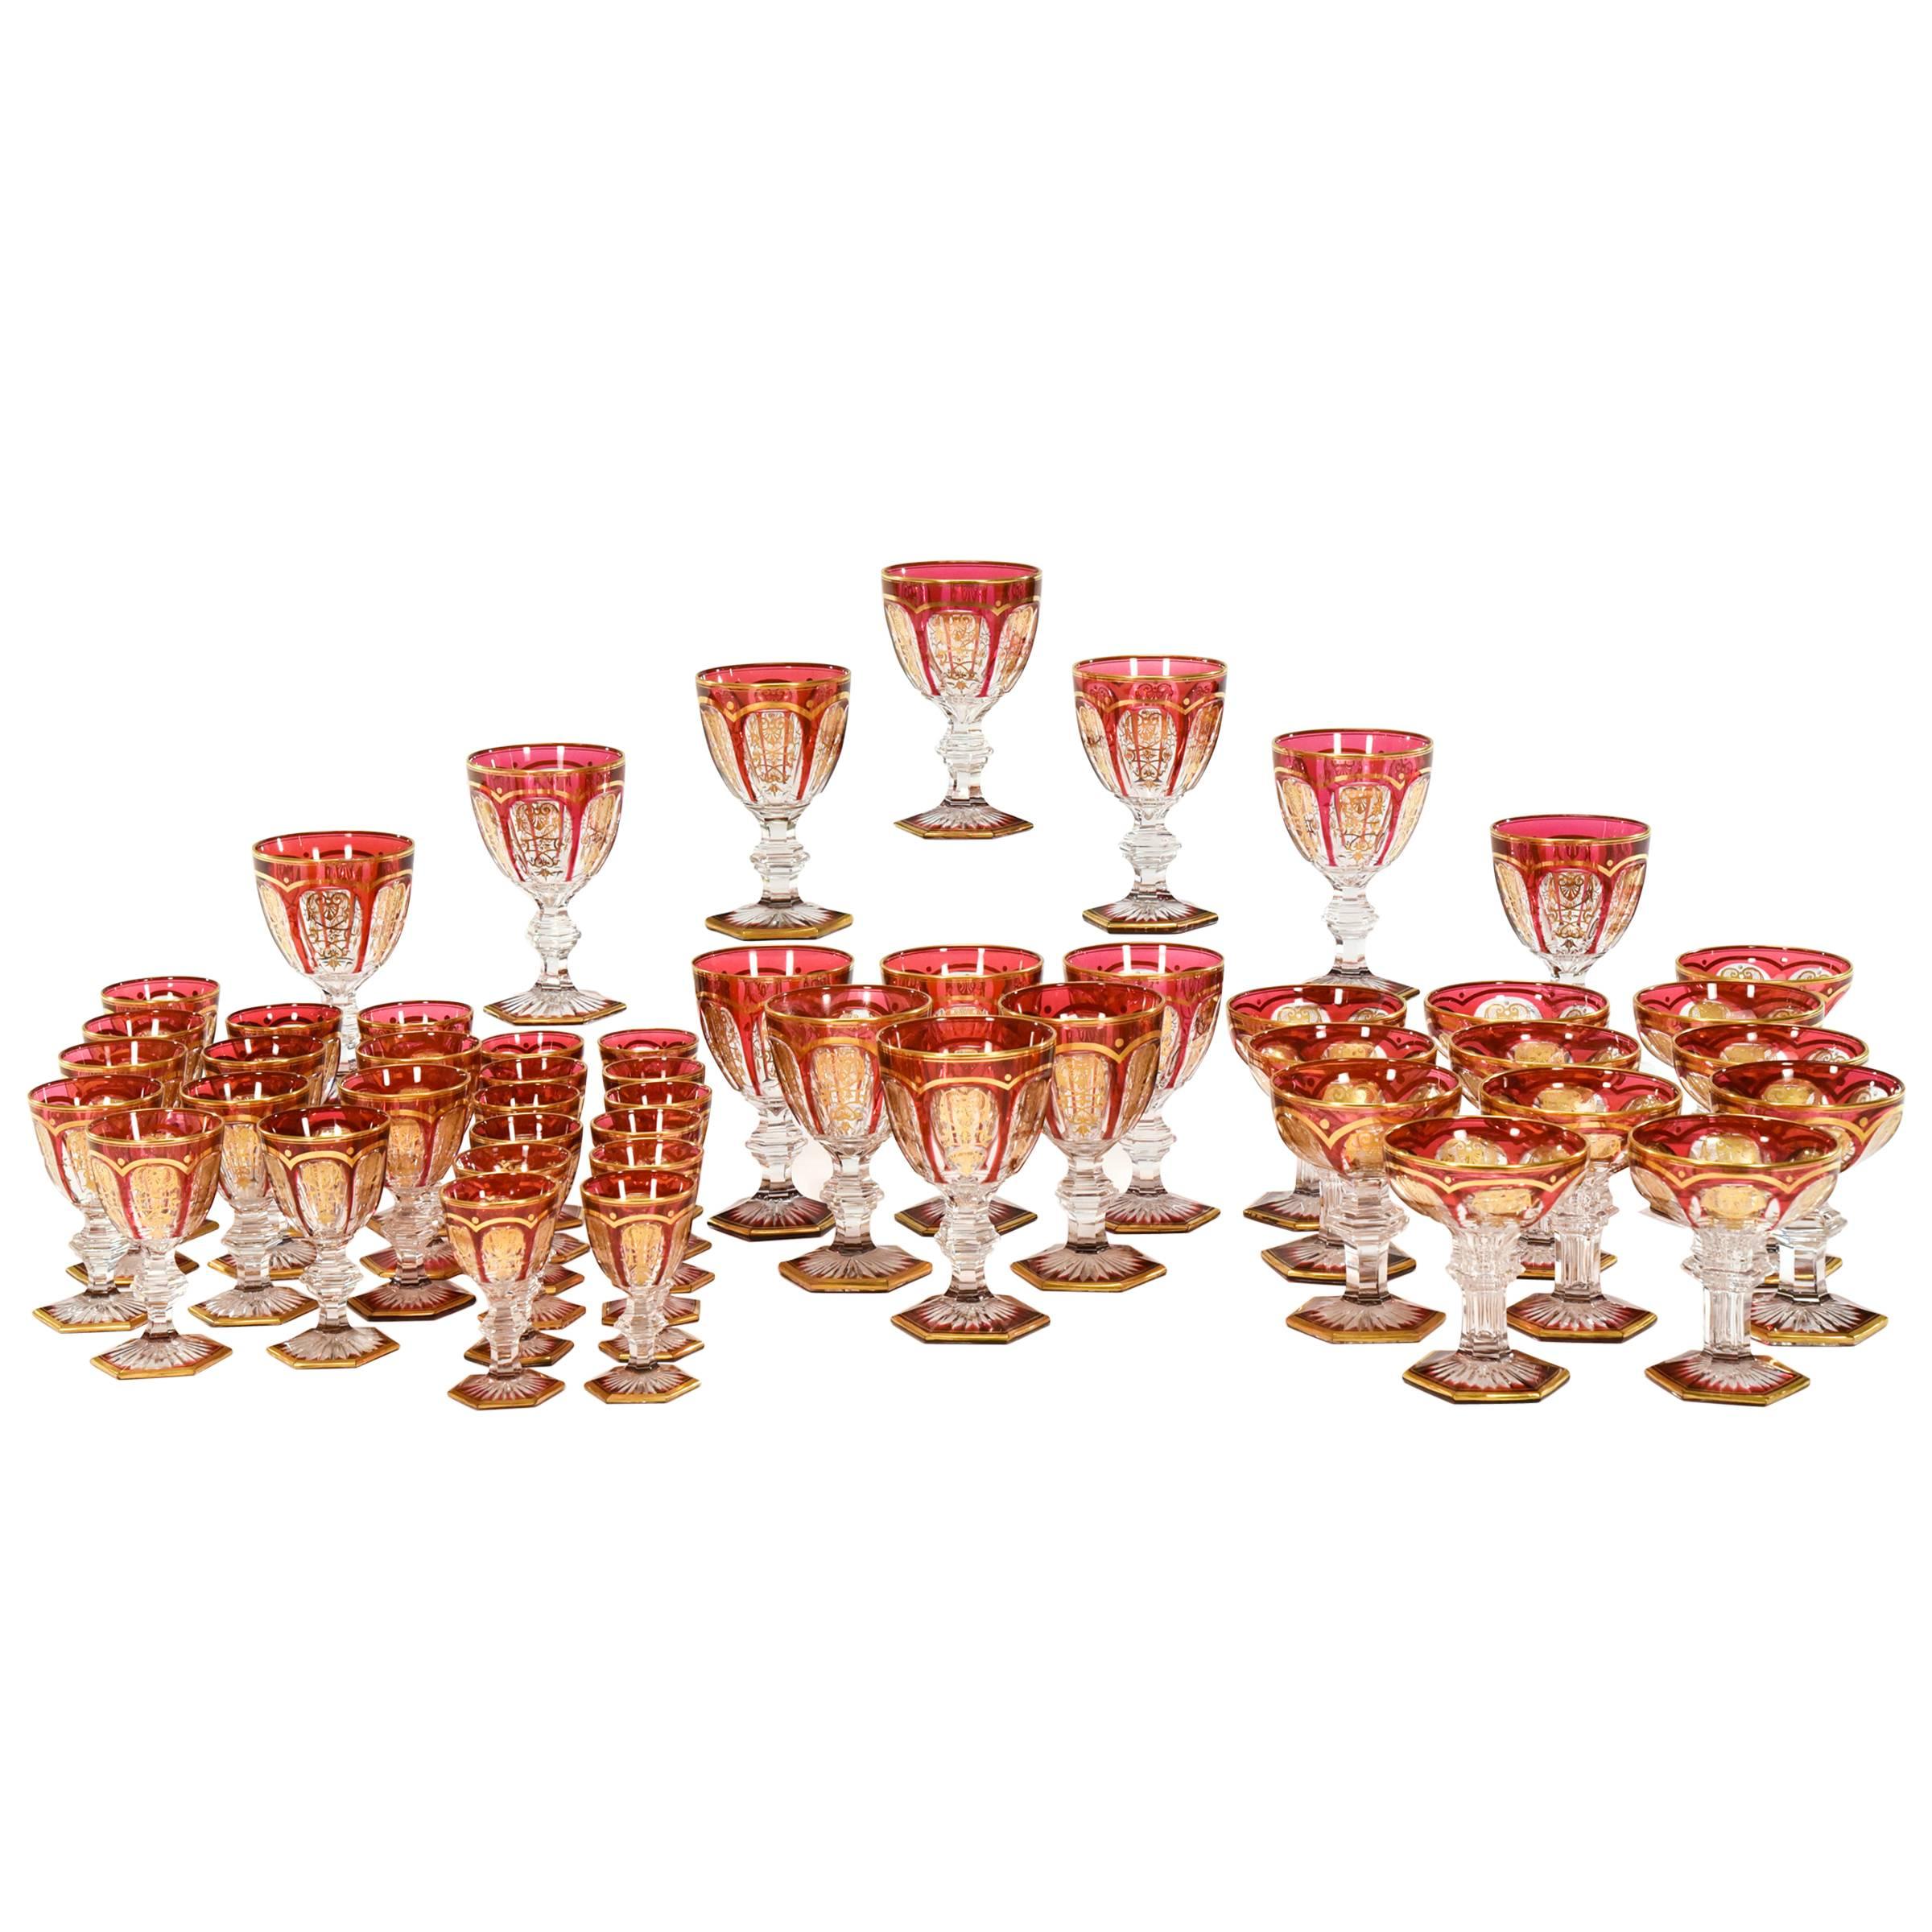 Baccarat Stemware Service Cranberry with Empire Gold Decoration 48 Pieces